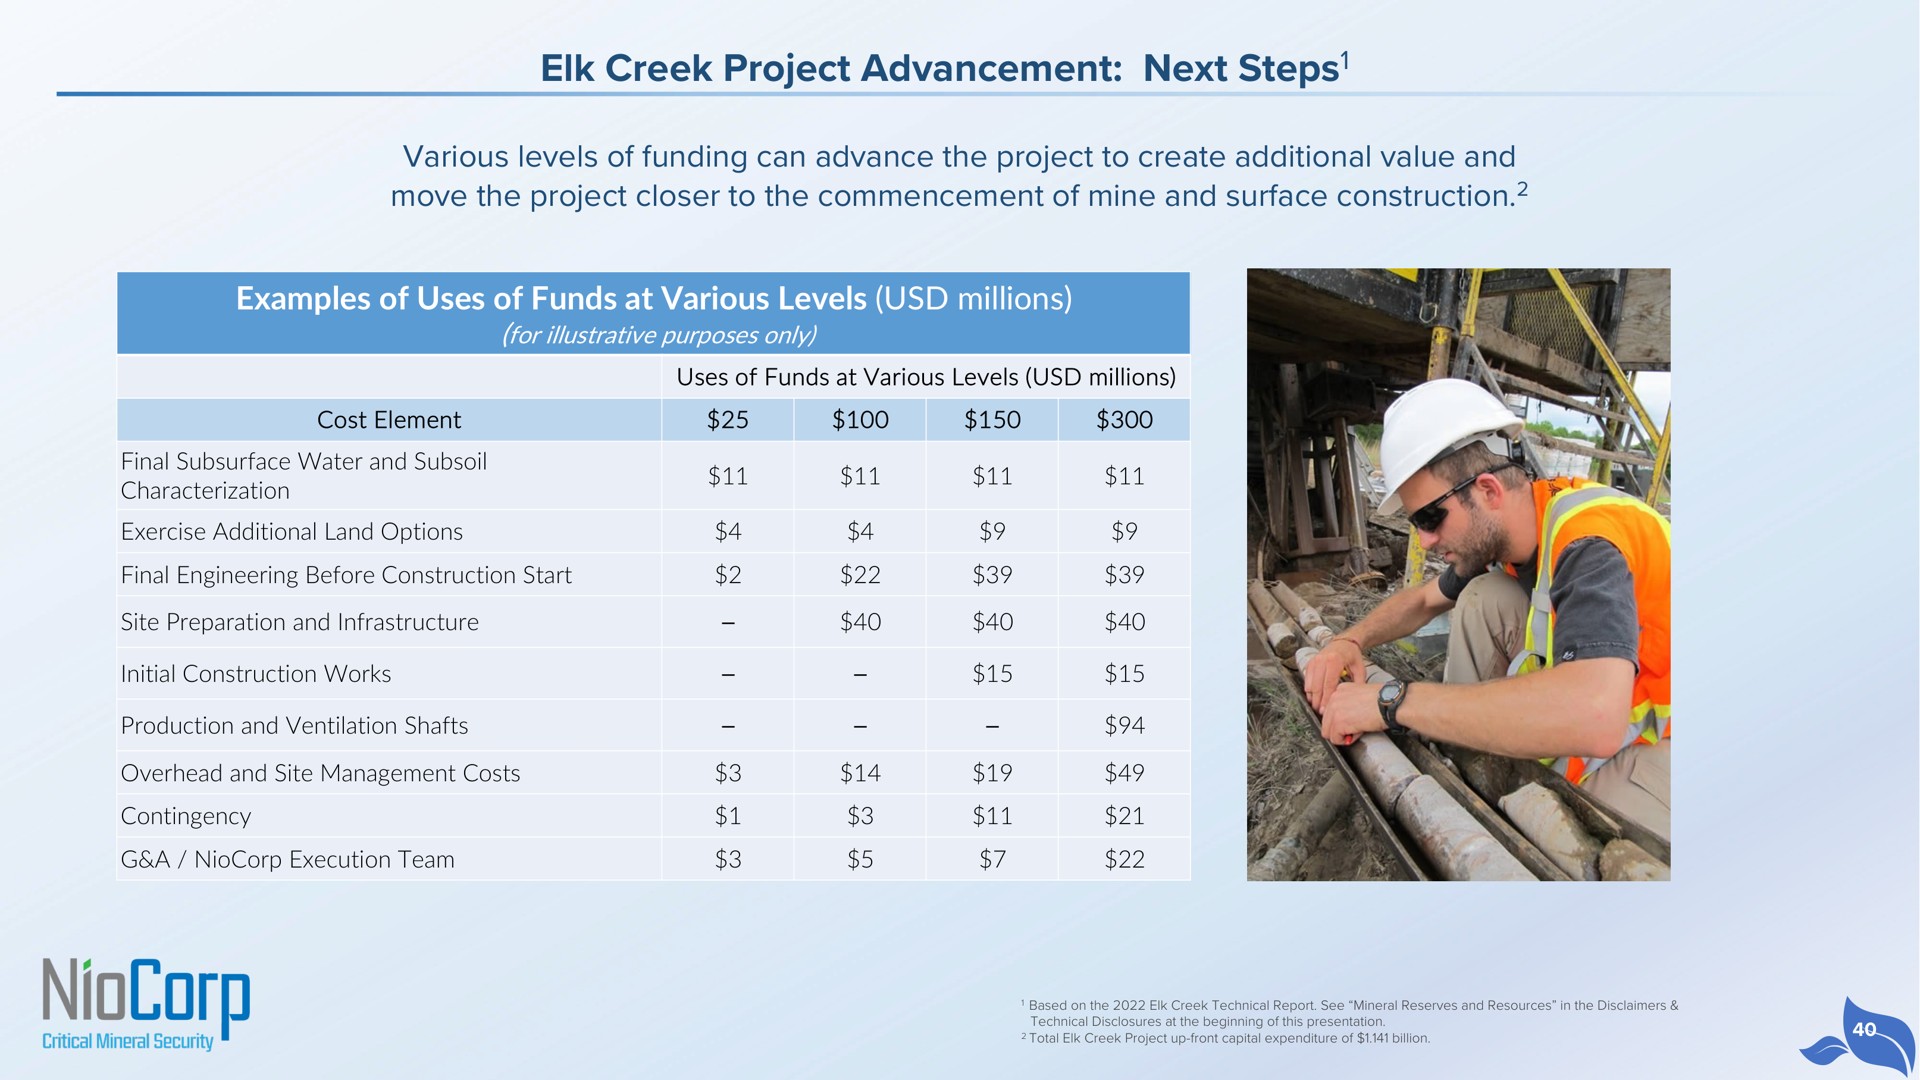 elk creek project advancement next steps various levels of funding can advance the project to create additional value and move the project closer to the commencement of mine and surface construction examples of uses of funds at various levels millions steps cost element i ates | NioCorp